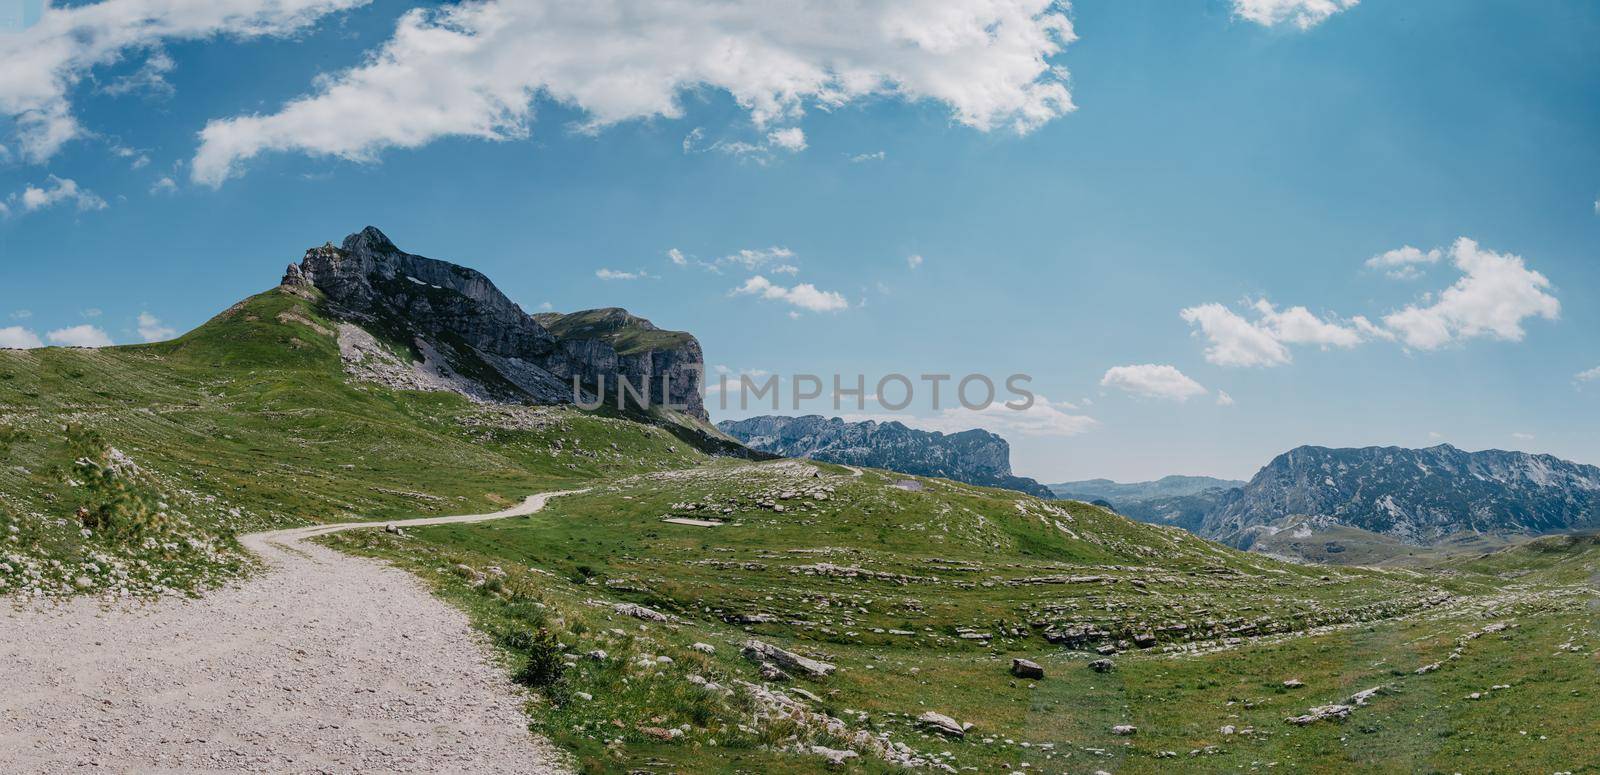 Amaizing sunset view on Durmitor mountains, National Park, Mediterranean, Montenegro, Balkans, Europe. Bright summer view from Sedlo pass. Instagram picture. The road near the house in the mountains